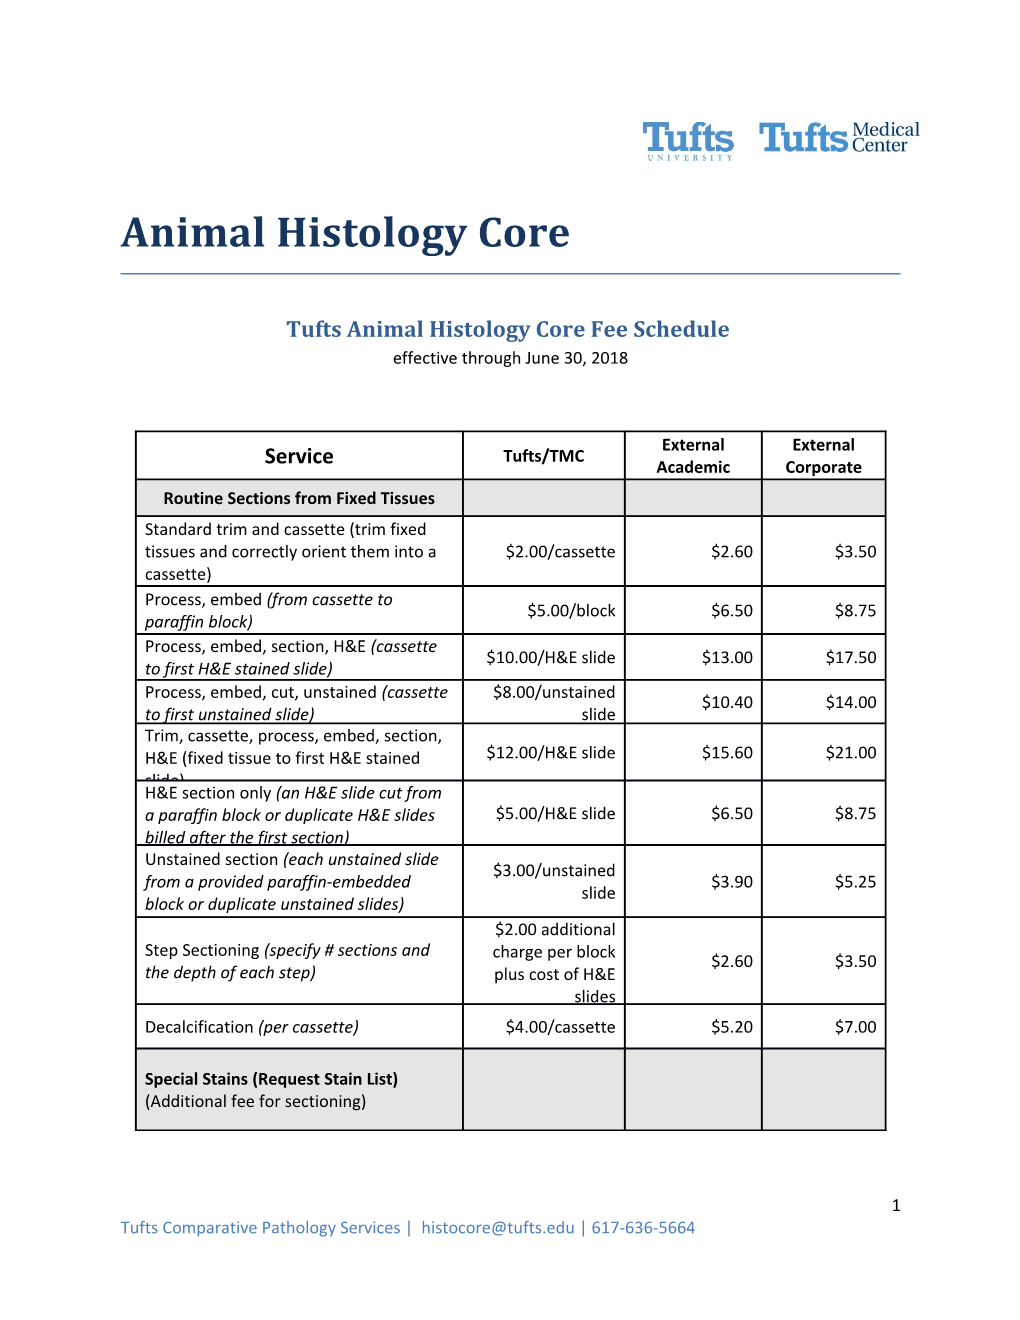 Tufts Animal Histology Core Fee Schedule